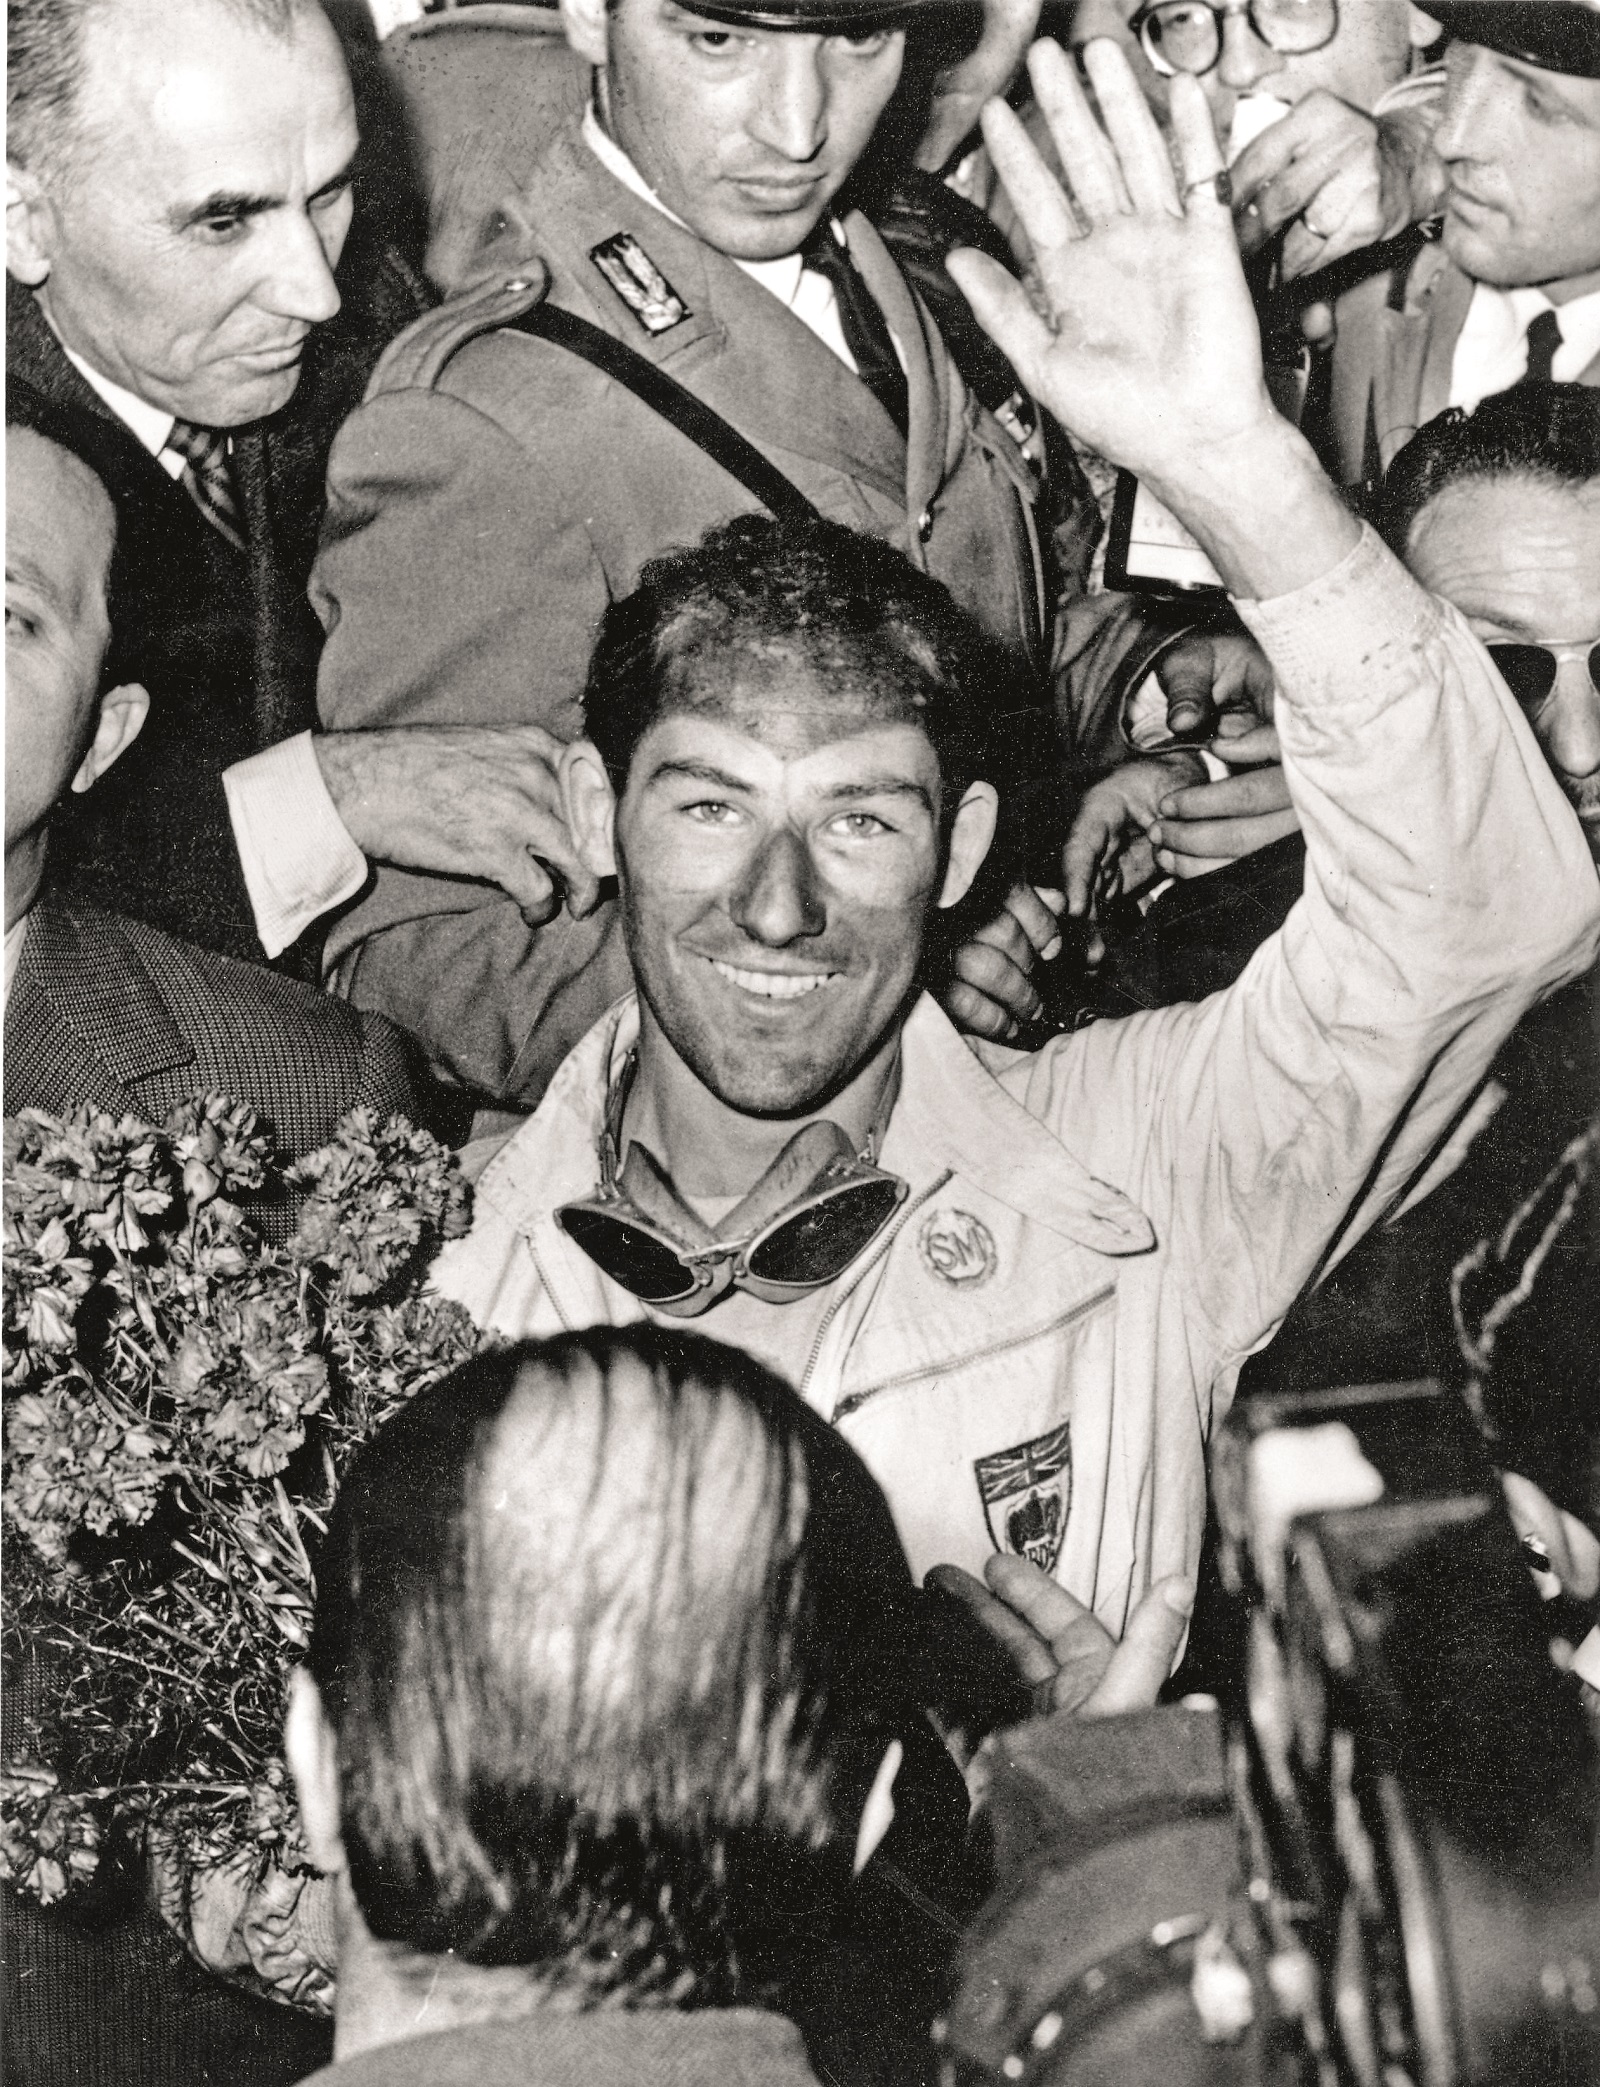 British racing driver Stirling Moss waves for the cameras after winning the Italian Mille Miglia Race, setting a new record.   (Photo by Keystone/Getty Images)